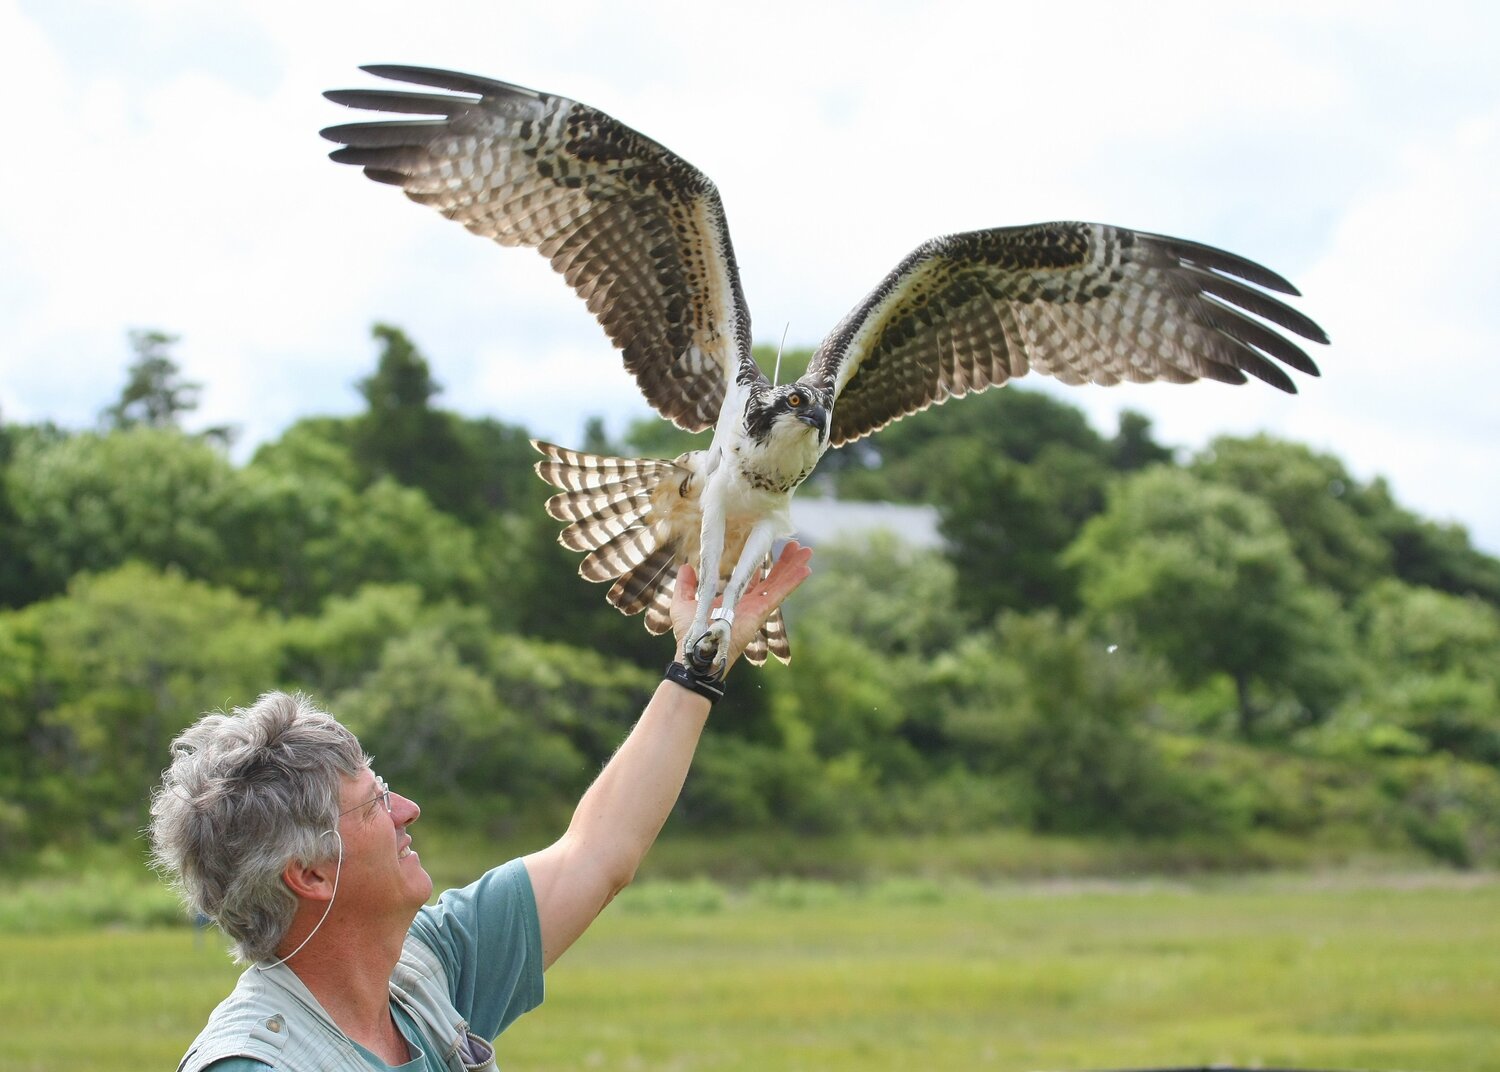 Rob Bierregaard, a pioneer in the study of osprey migration patterns using radio telemetry, releases one of four first-year ospreys from the ECGA program in 2013 and 2014. (Photo courtesy of Craig Gibson)